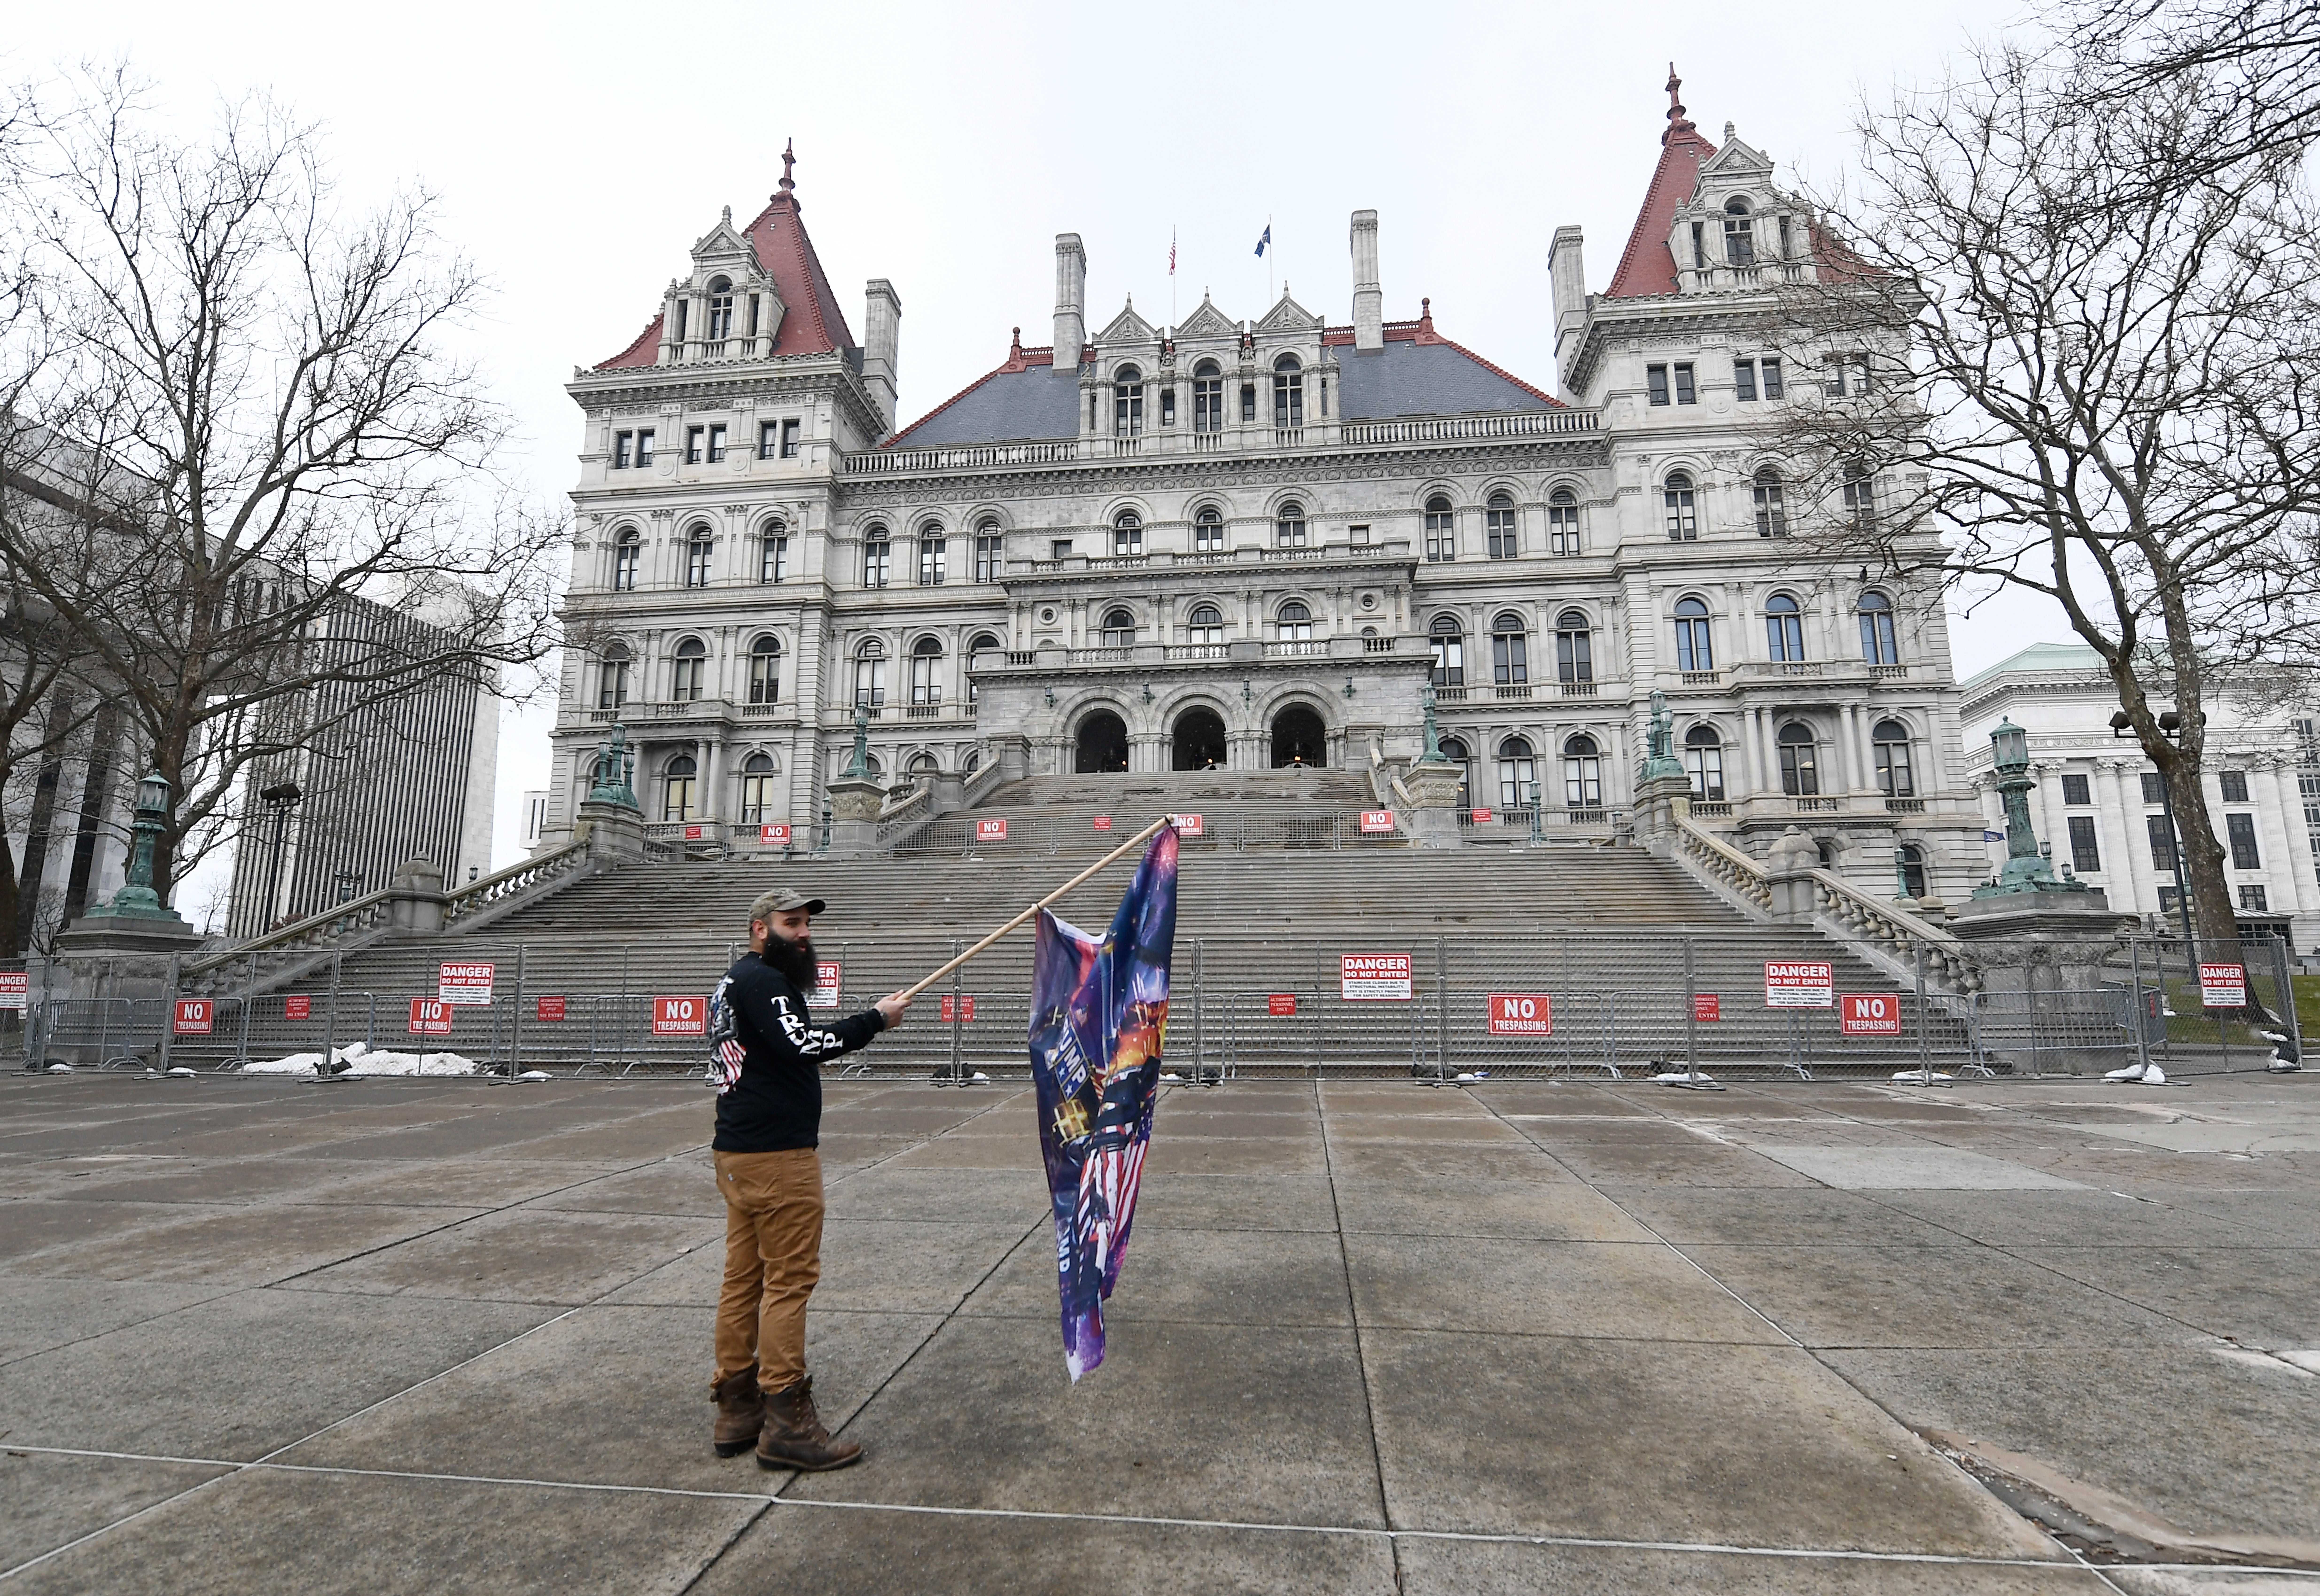 Trump supporter Mark Leggiero, of Florida, N.Y., holds a banner outside the New York state Capitol objecting the inauguration of President Joe Biden on Wednesday 20 January 2021, in Albany, N.Y